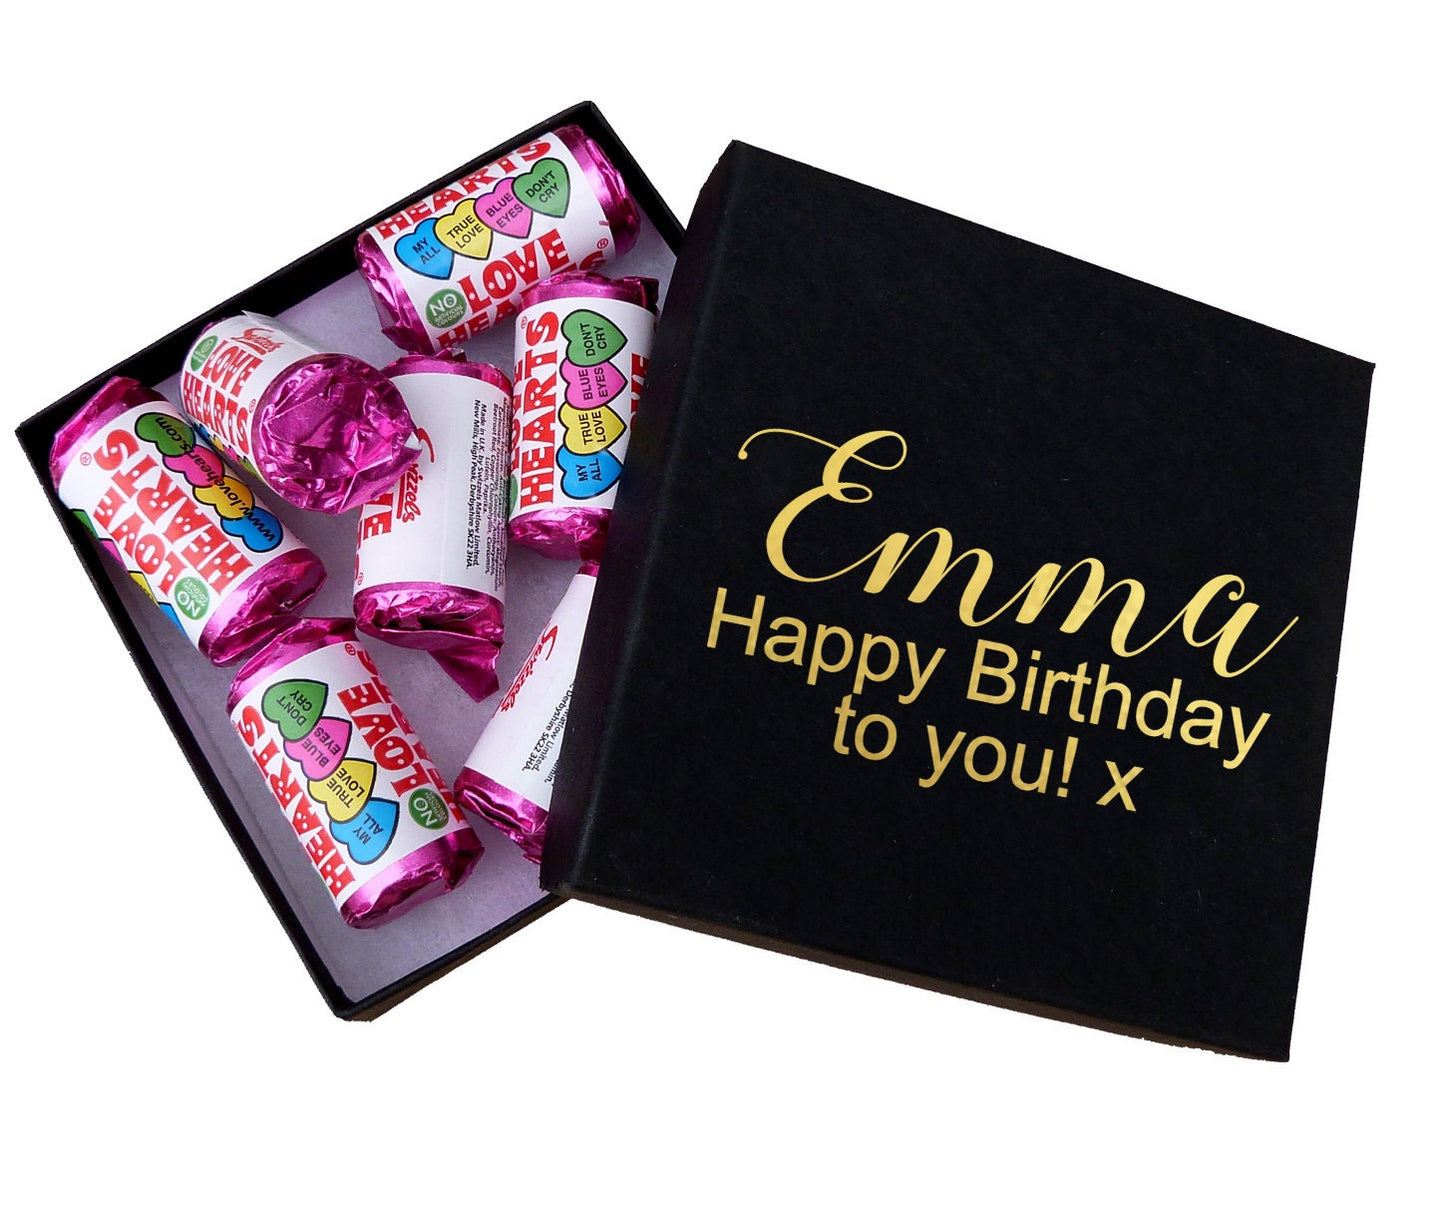 Personalised chocolates gift box gold foil thank you name message care package teacher love heart sweets gift thinking of you